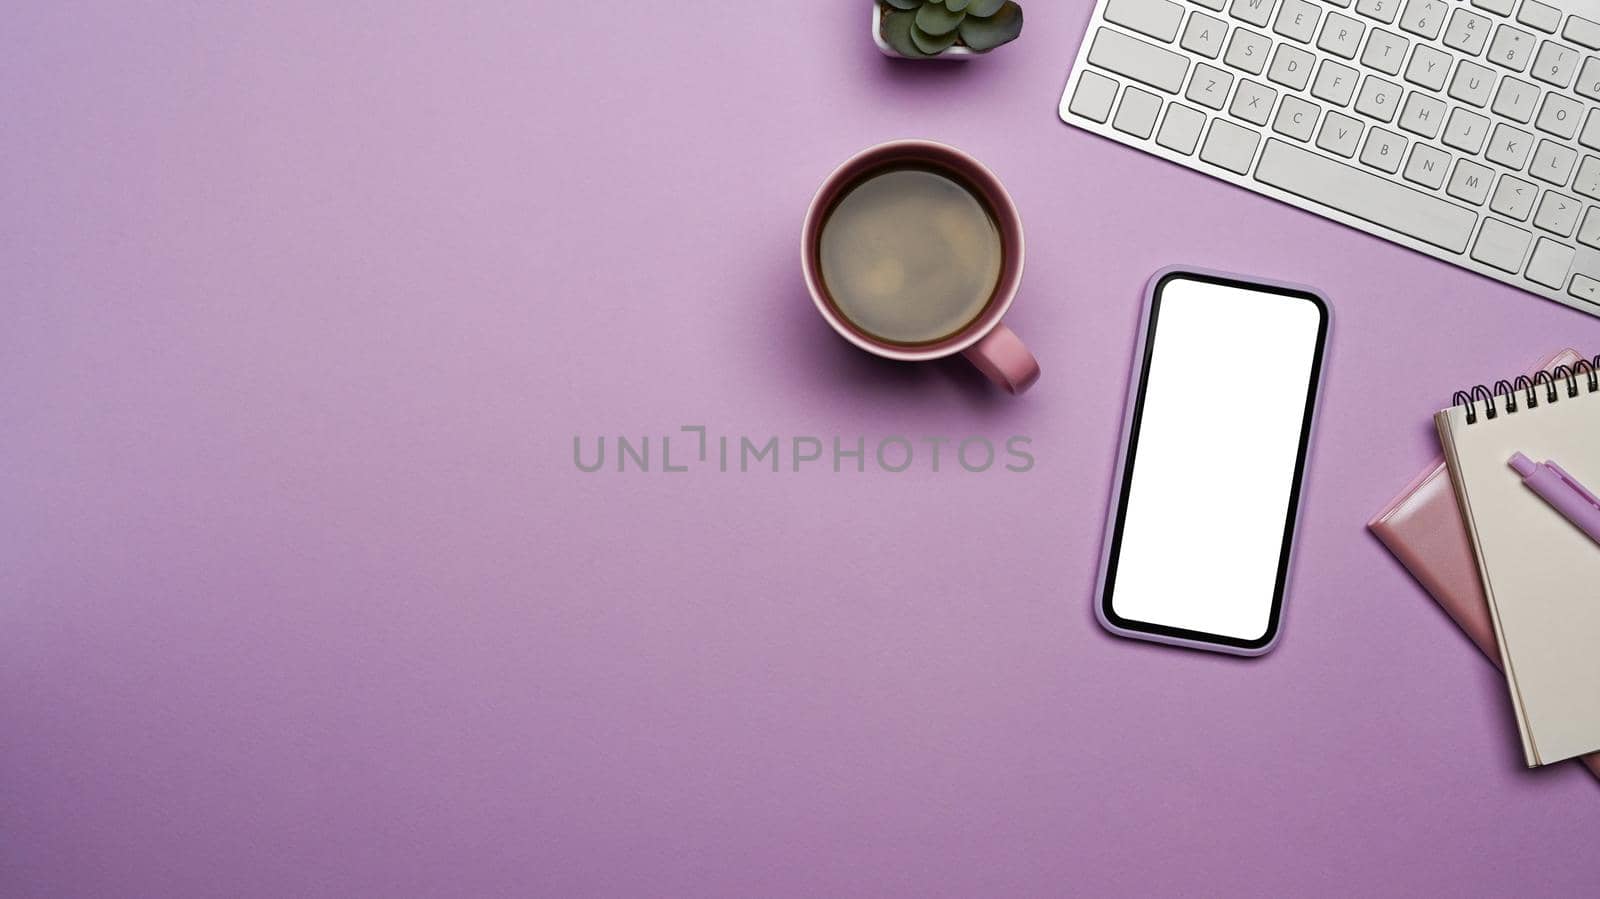 Mobile phone with blank screen, coffee cup and supplies on purple background. by prathanchorruangsak